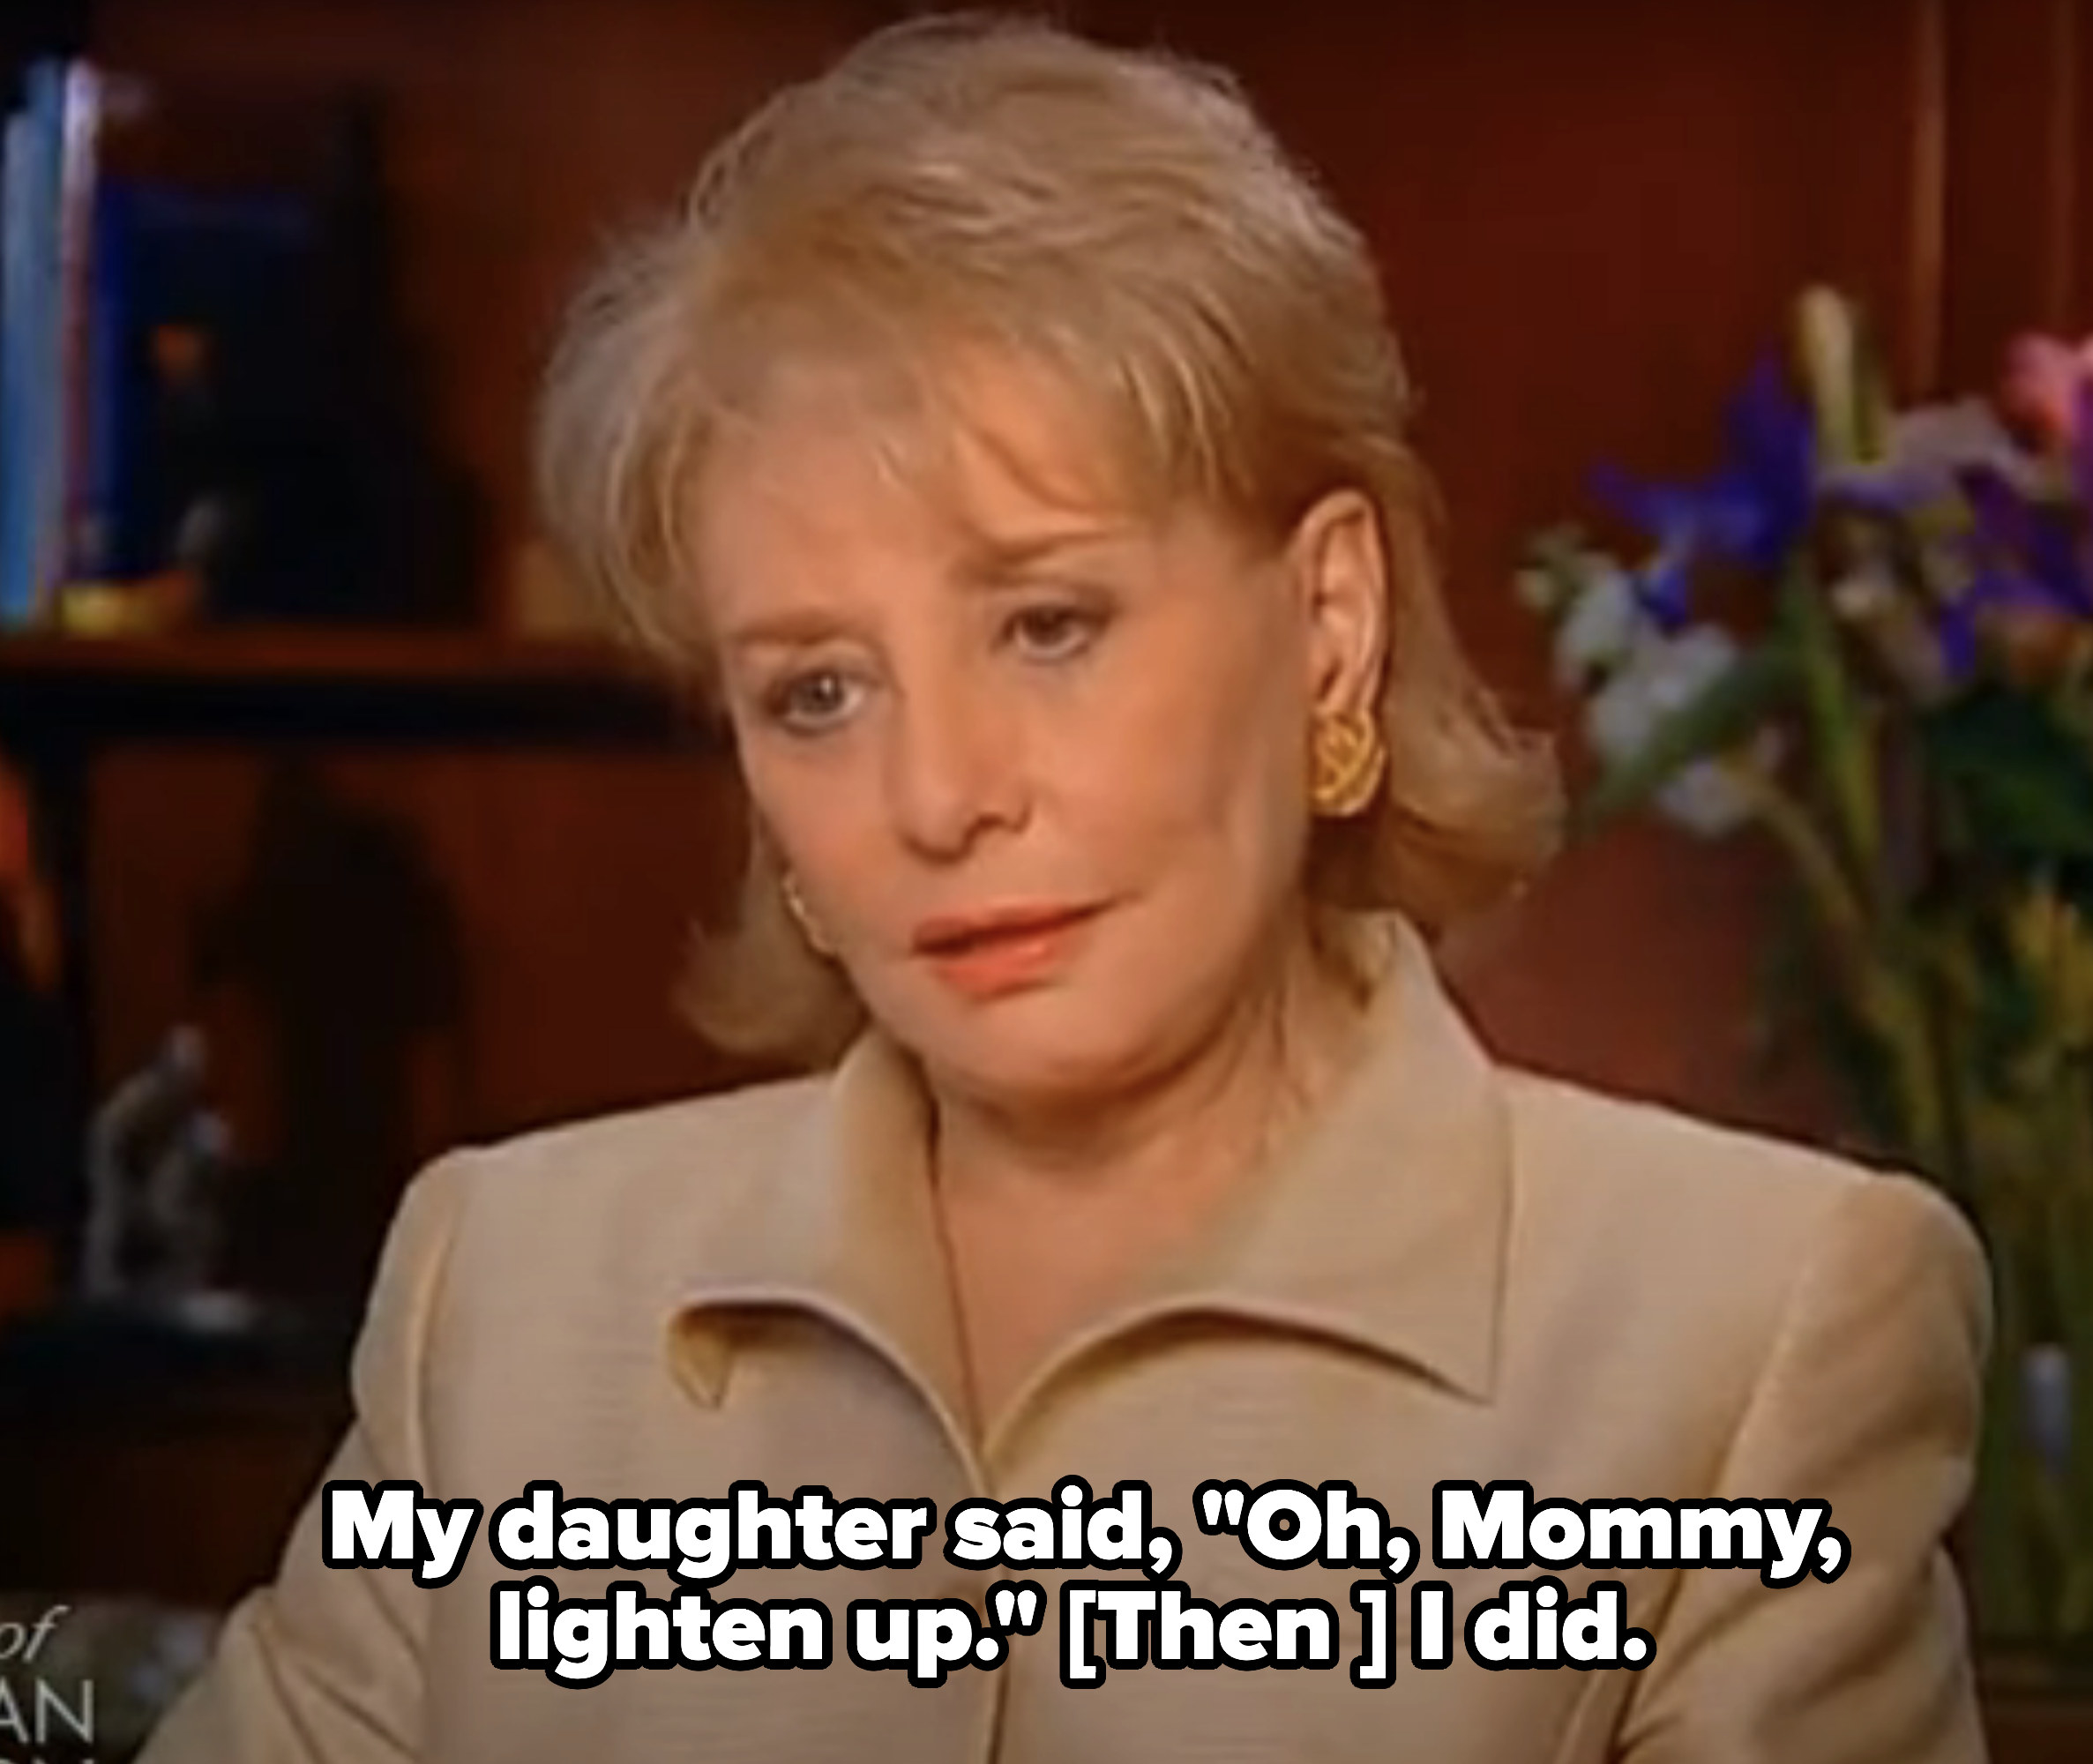 Barbara says &quot;My daughter said, &#x27;Oh, Mommy, lighten up.&#x27; Then I did&quot;